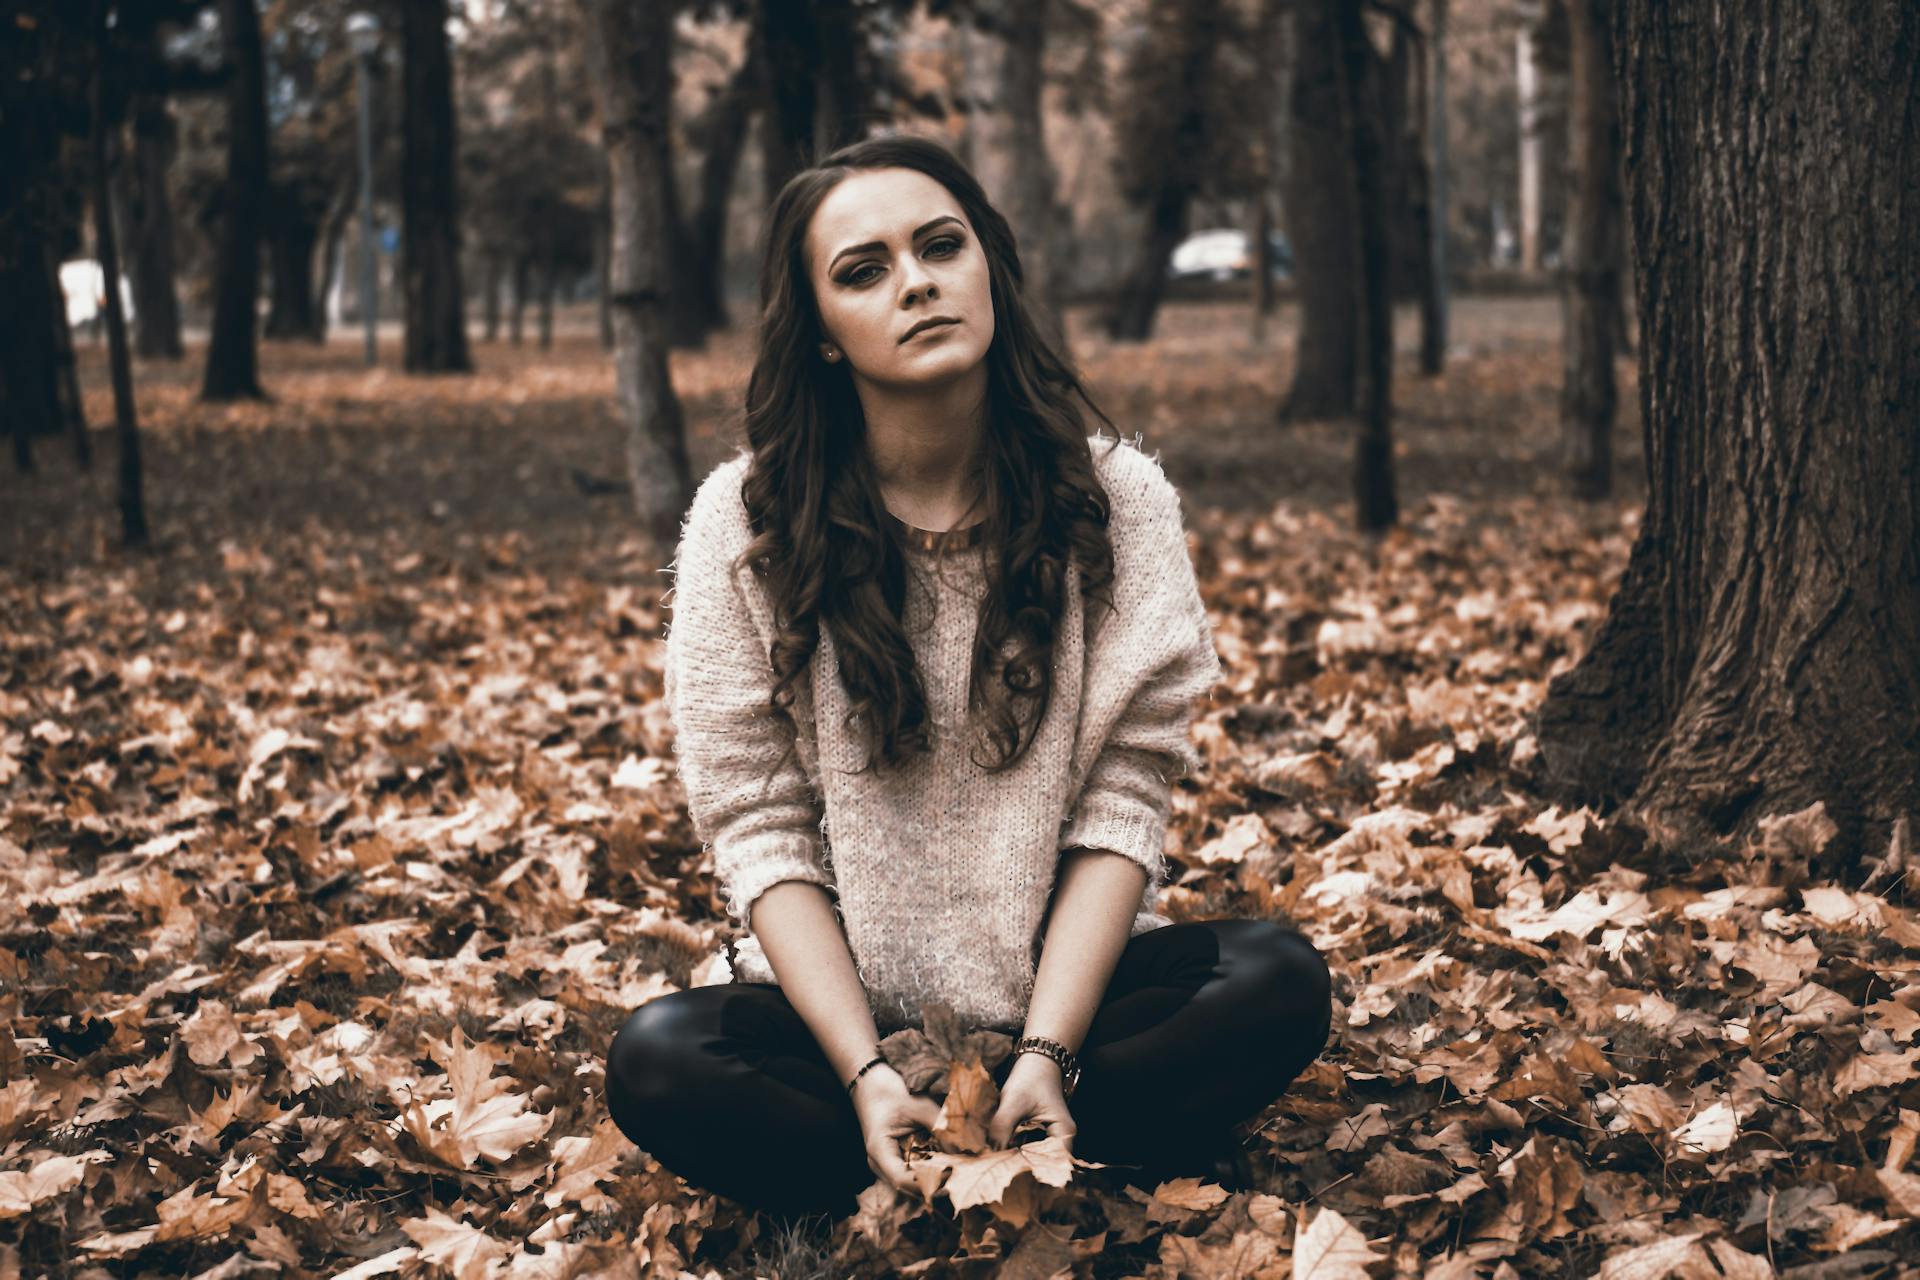 A young woman sitting in a forest during autumn | Source: Pexels